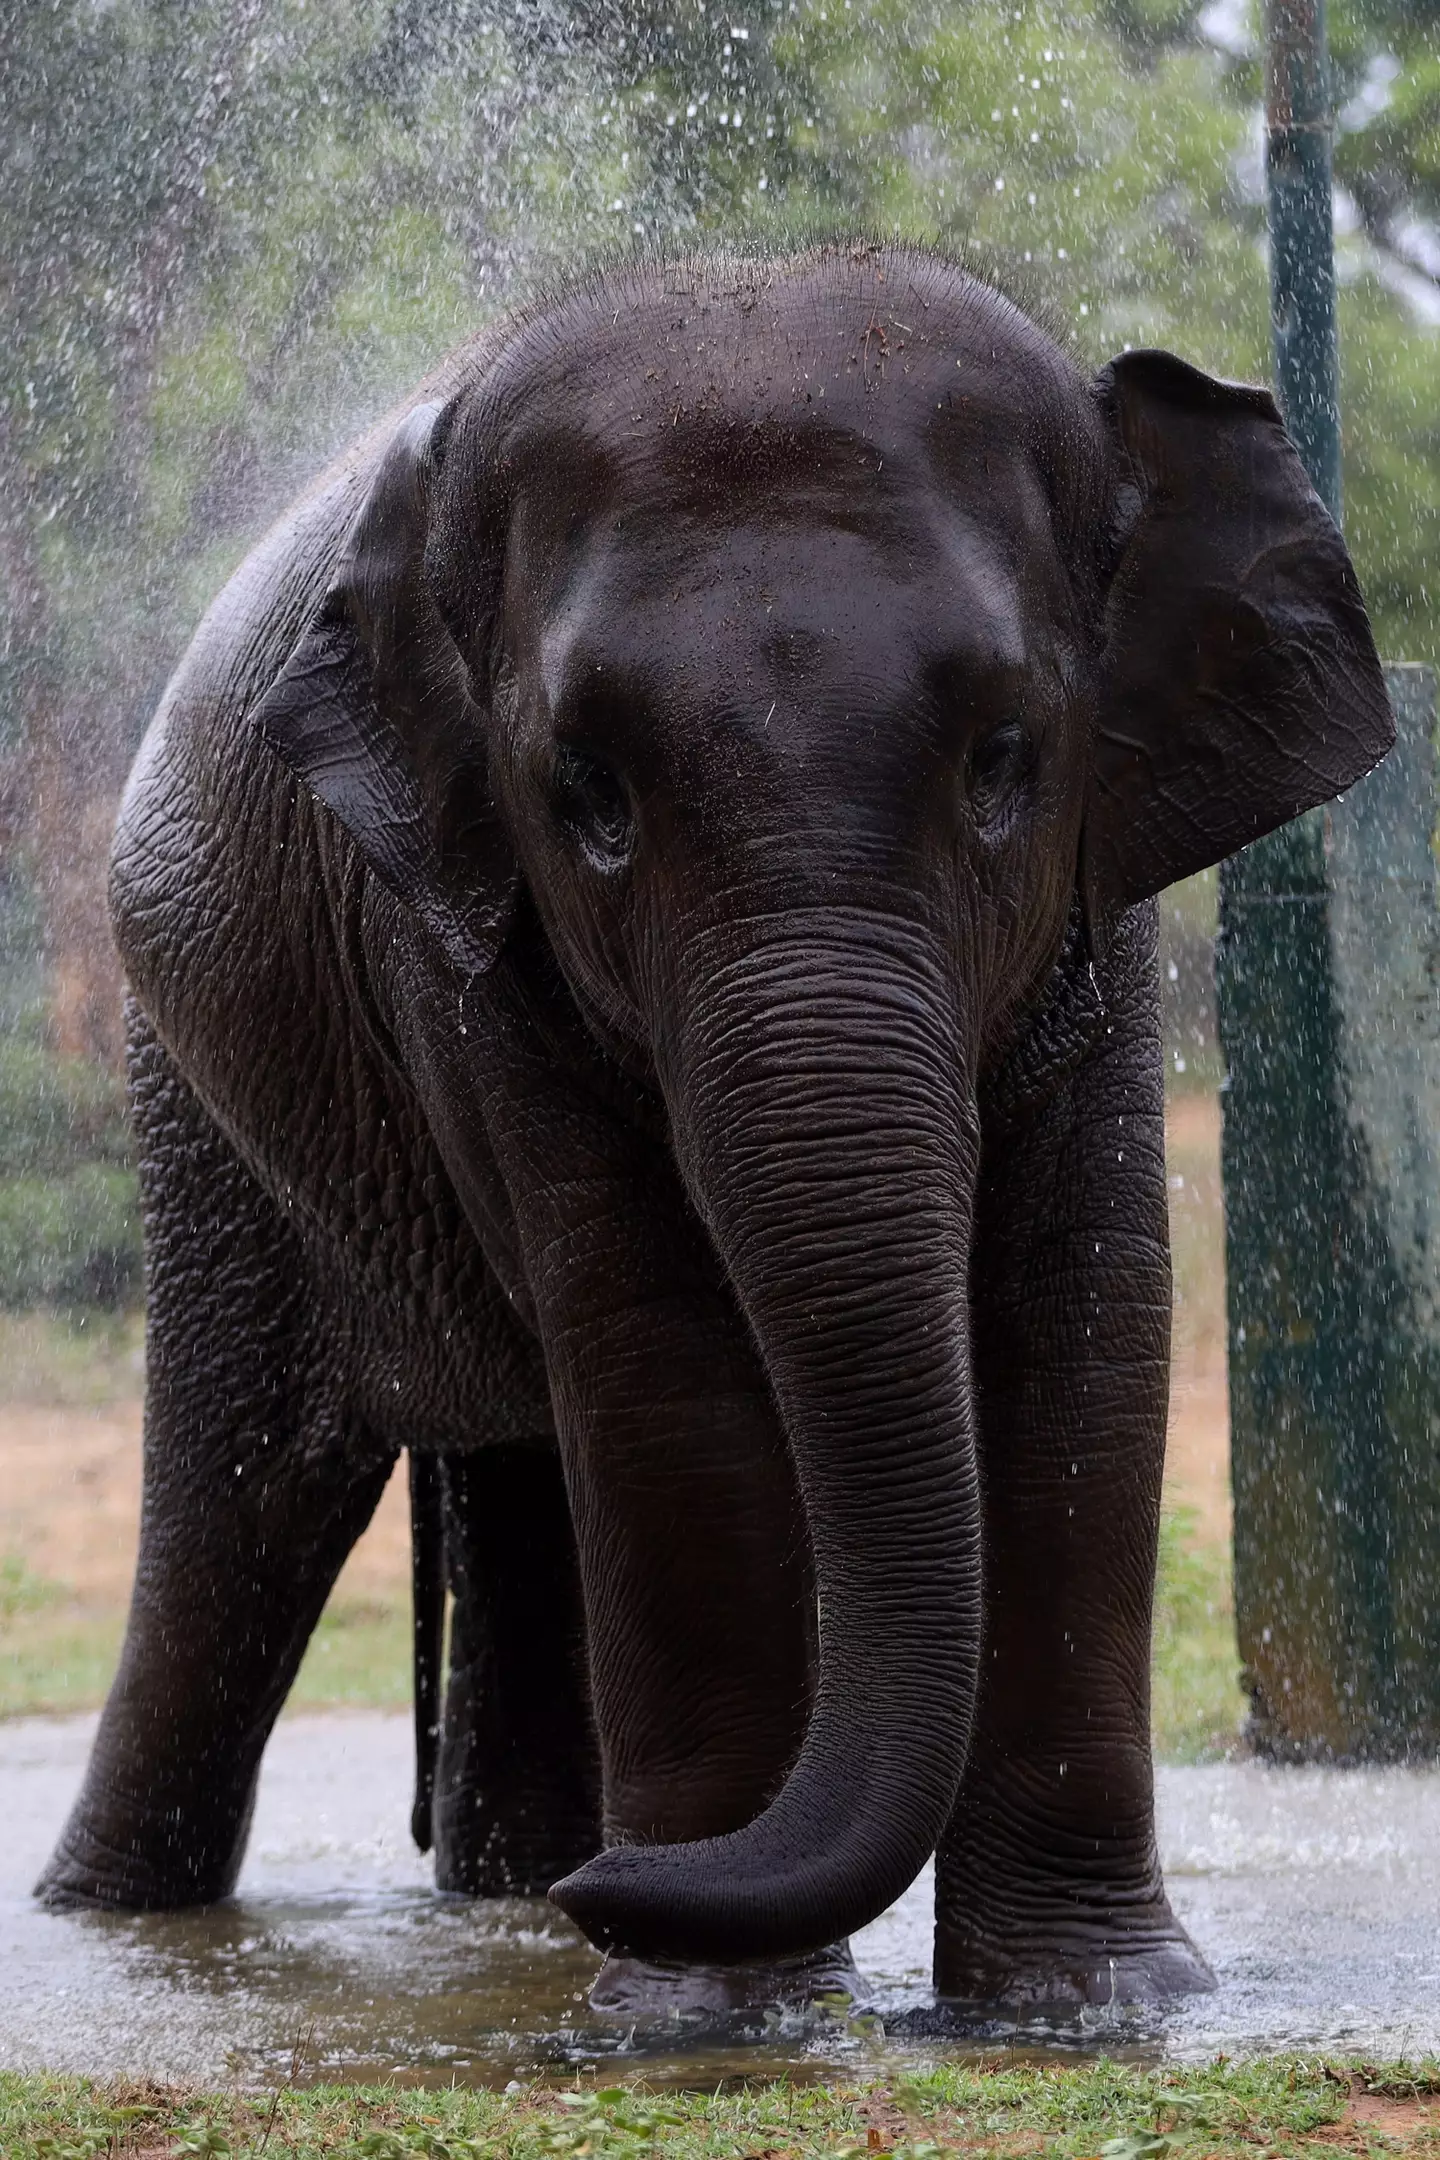 The Nonhuman Rights Project wants more rights for elephants.